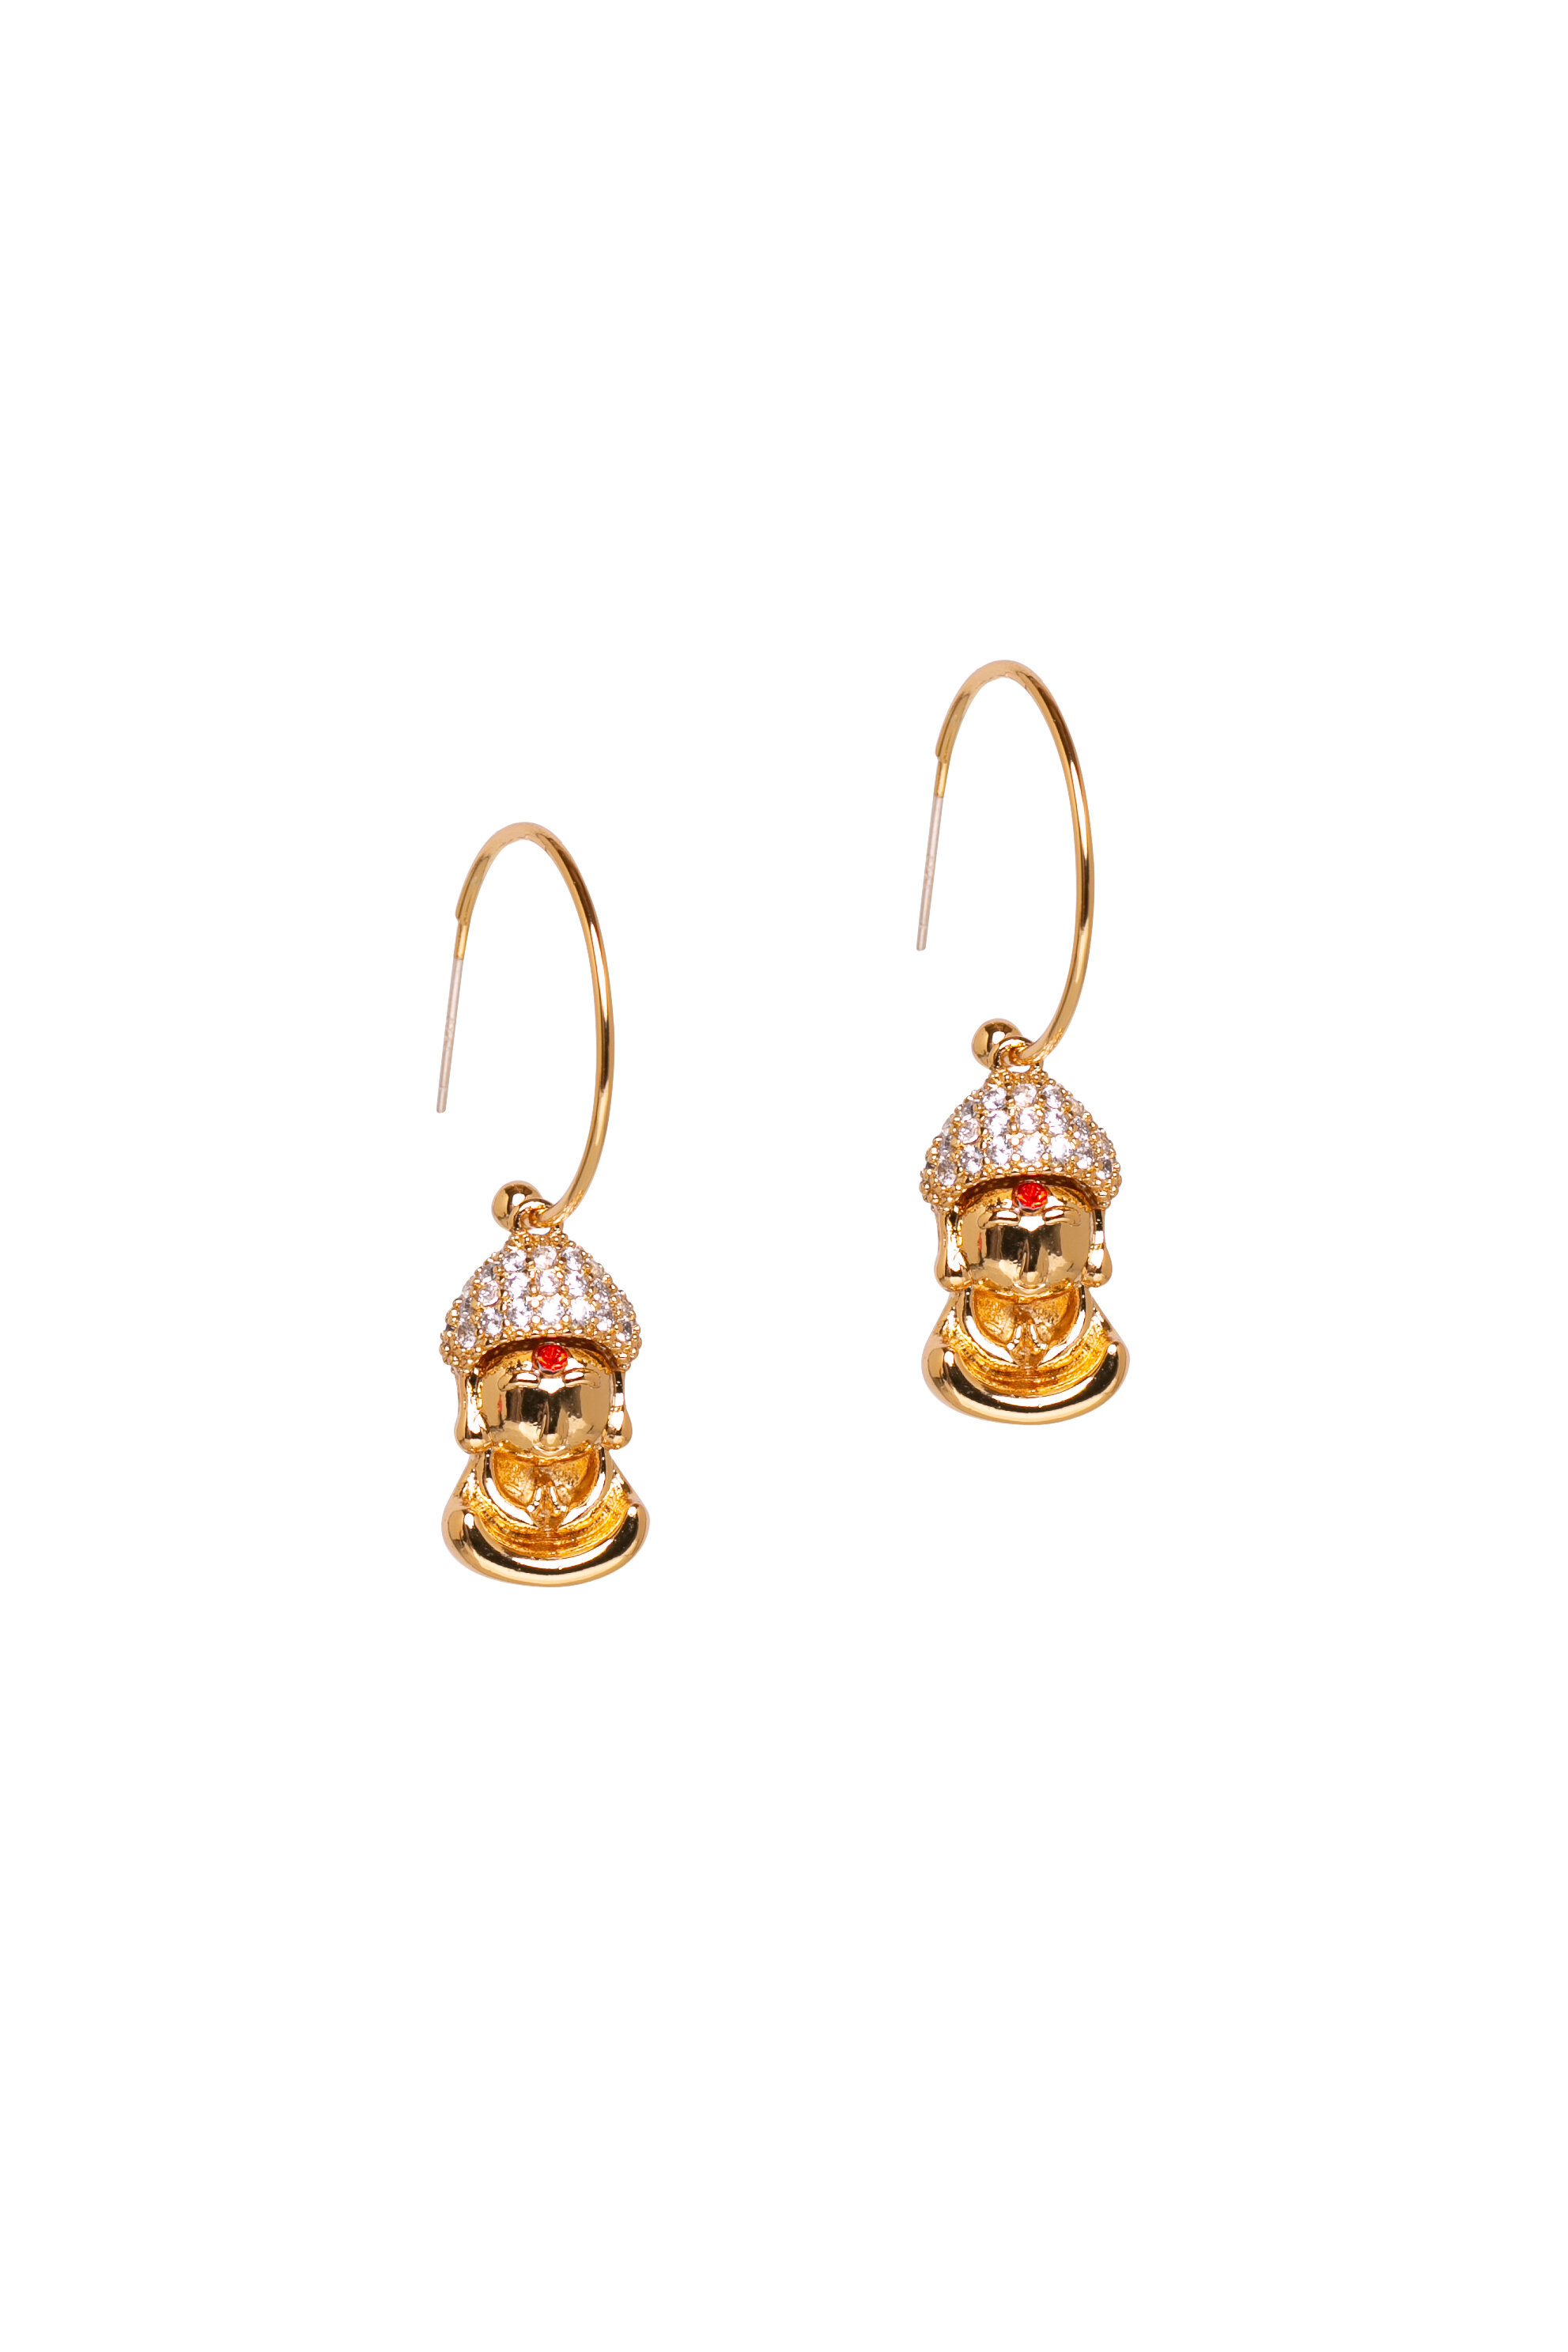 Small (20mm) Gold Plated Hoops with Buddha Charm.jpg